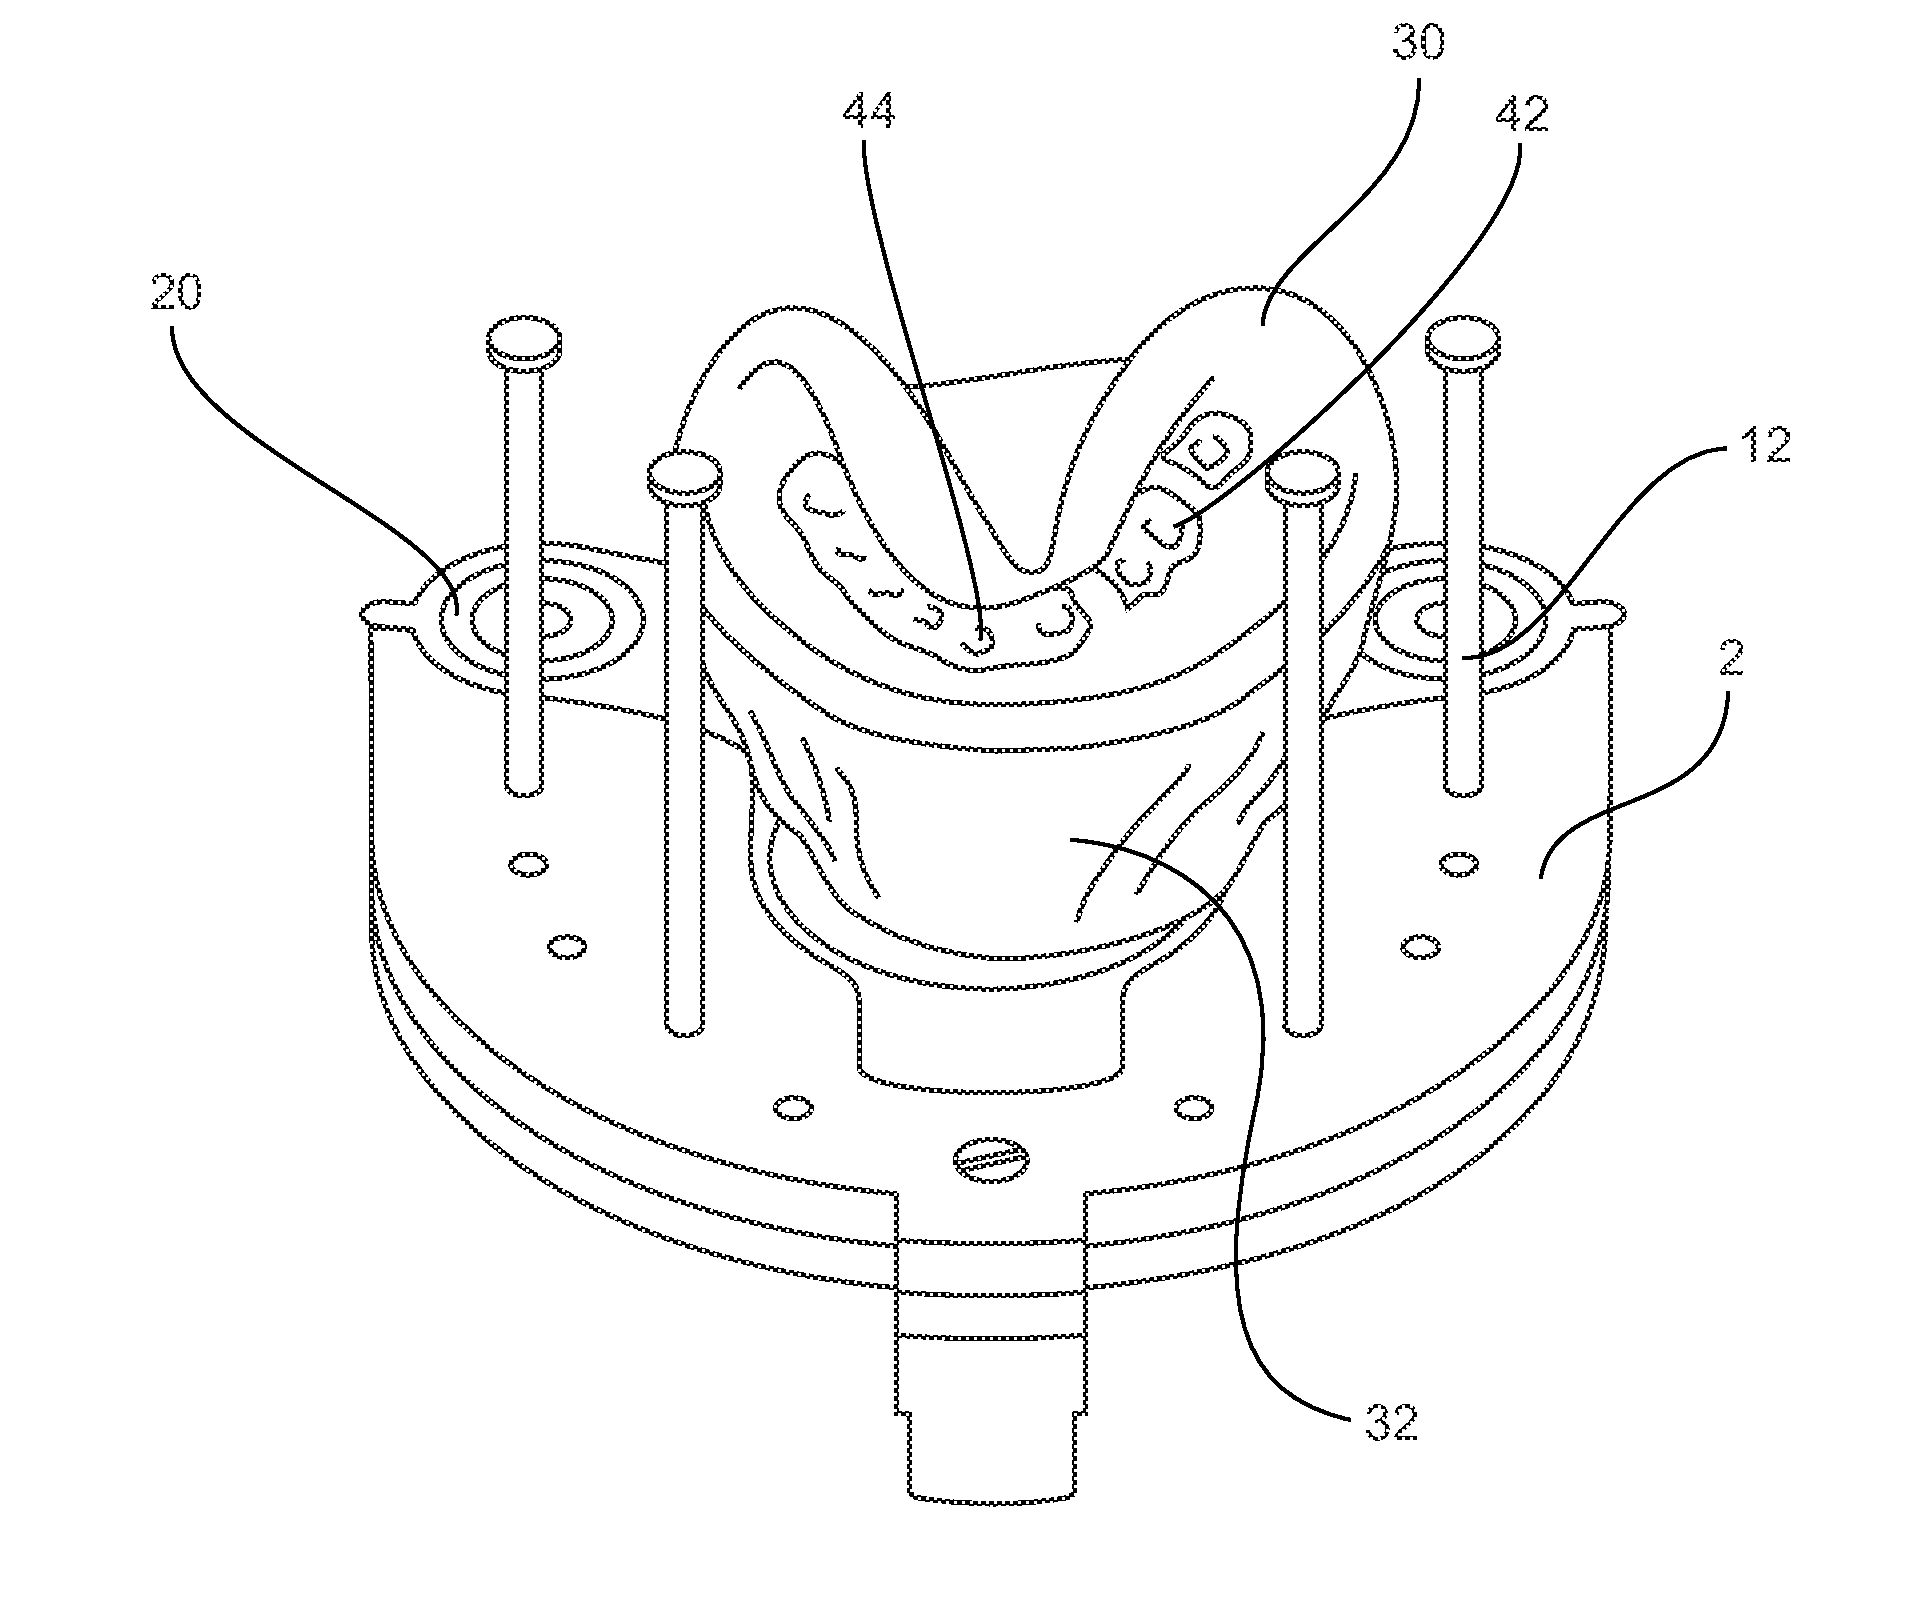 Positioning jig and improved methods to design and manufacture dental implants